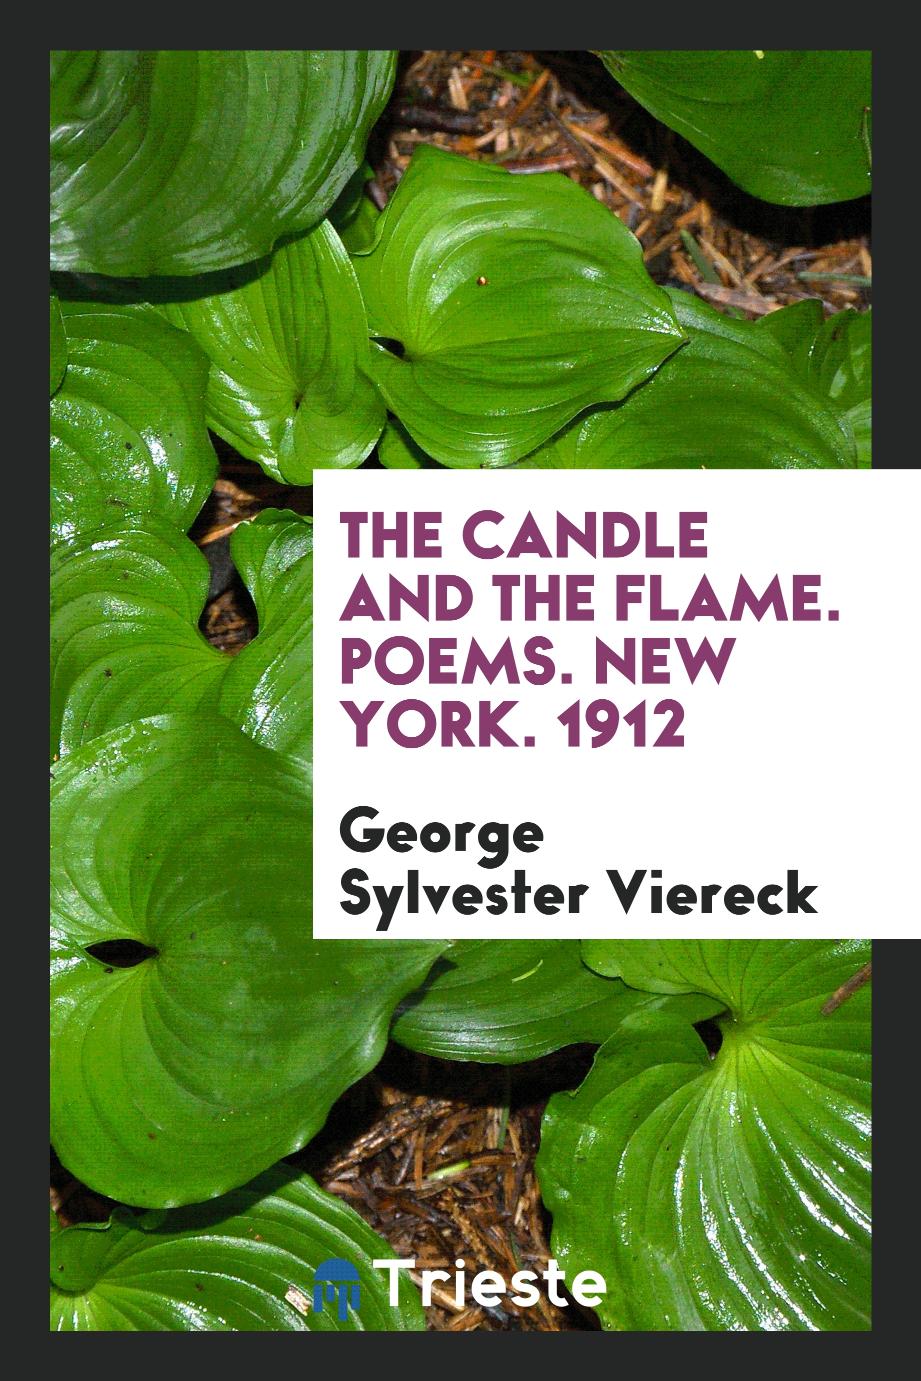 The Candle and the Flame. Poems. New York. 1912 - George Sylvester Viereck